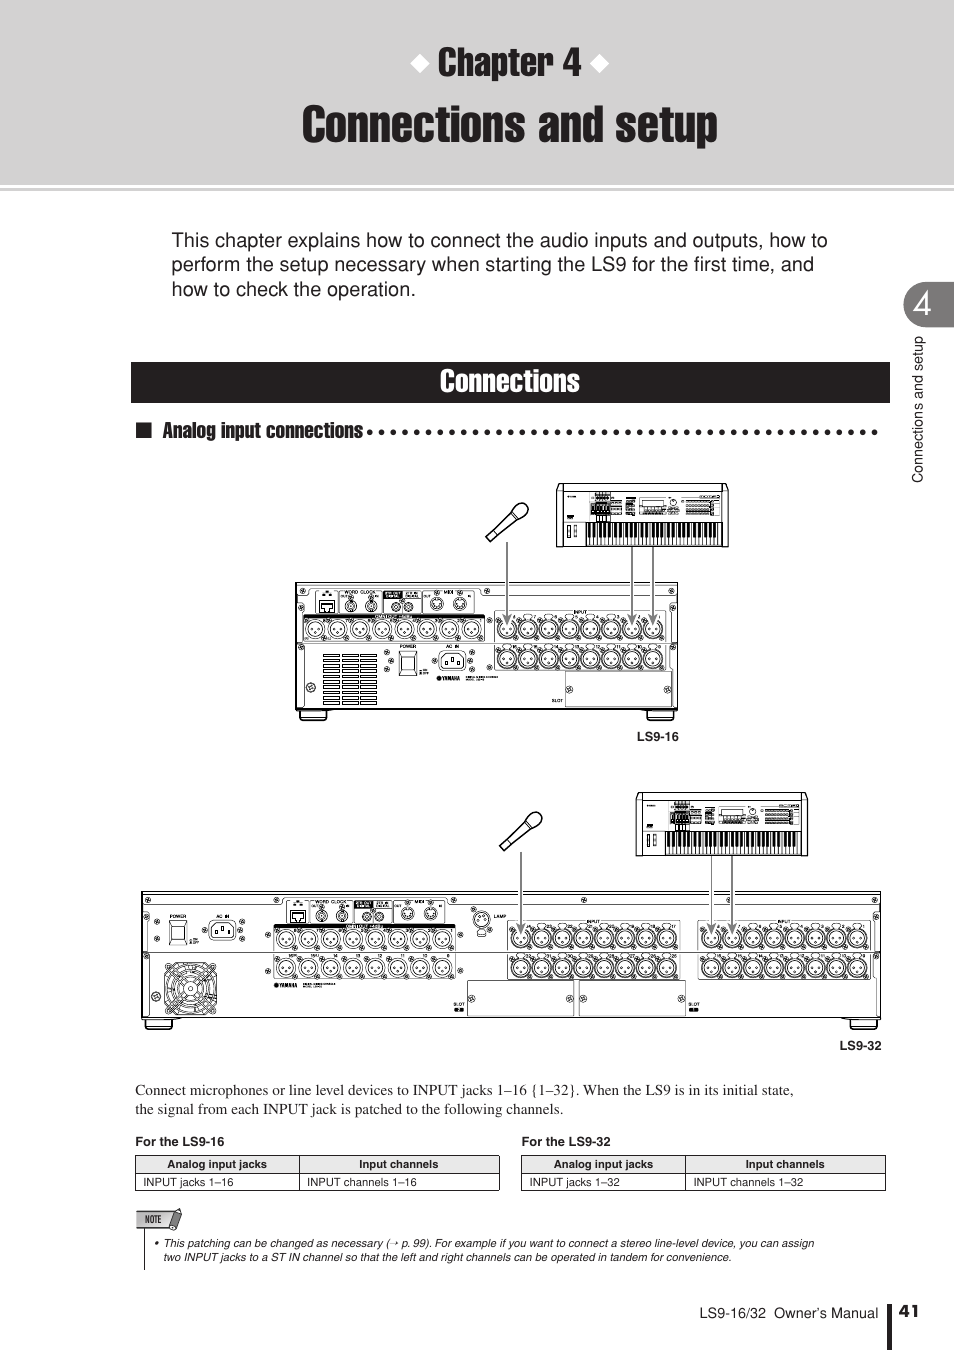 Connections and setup, Connections, Chapter 4 | Yamaha LS9 User Manual |  Page 41 / 290 | Original mode